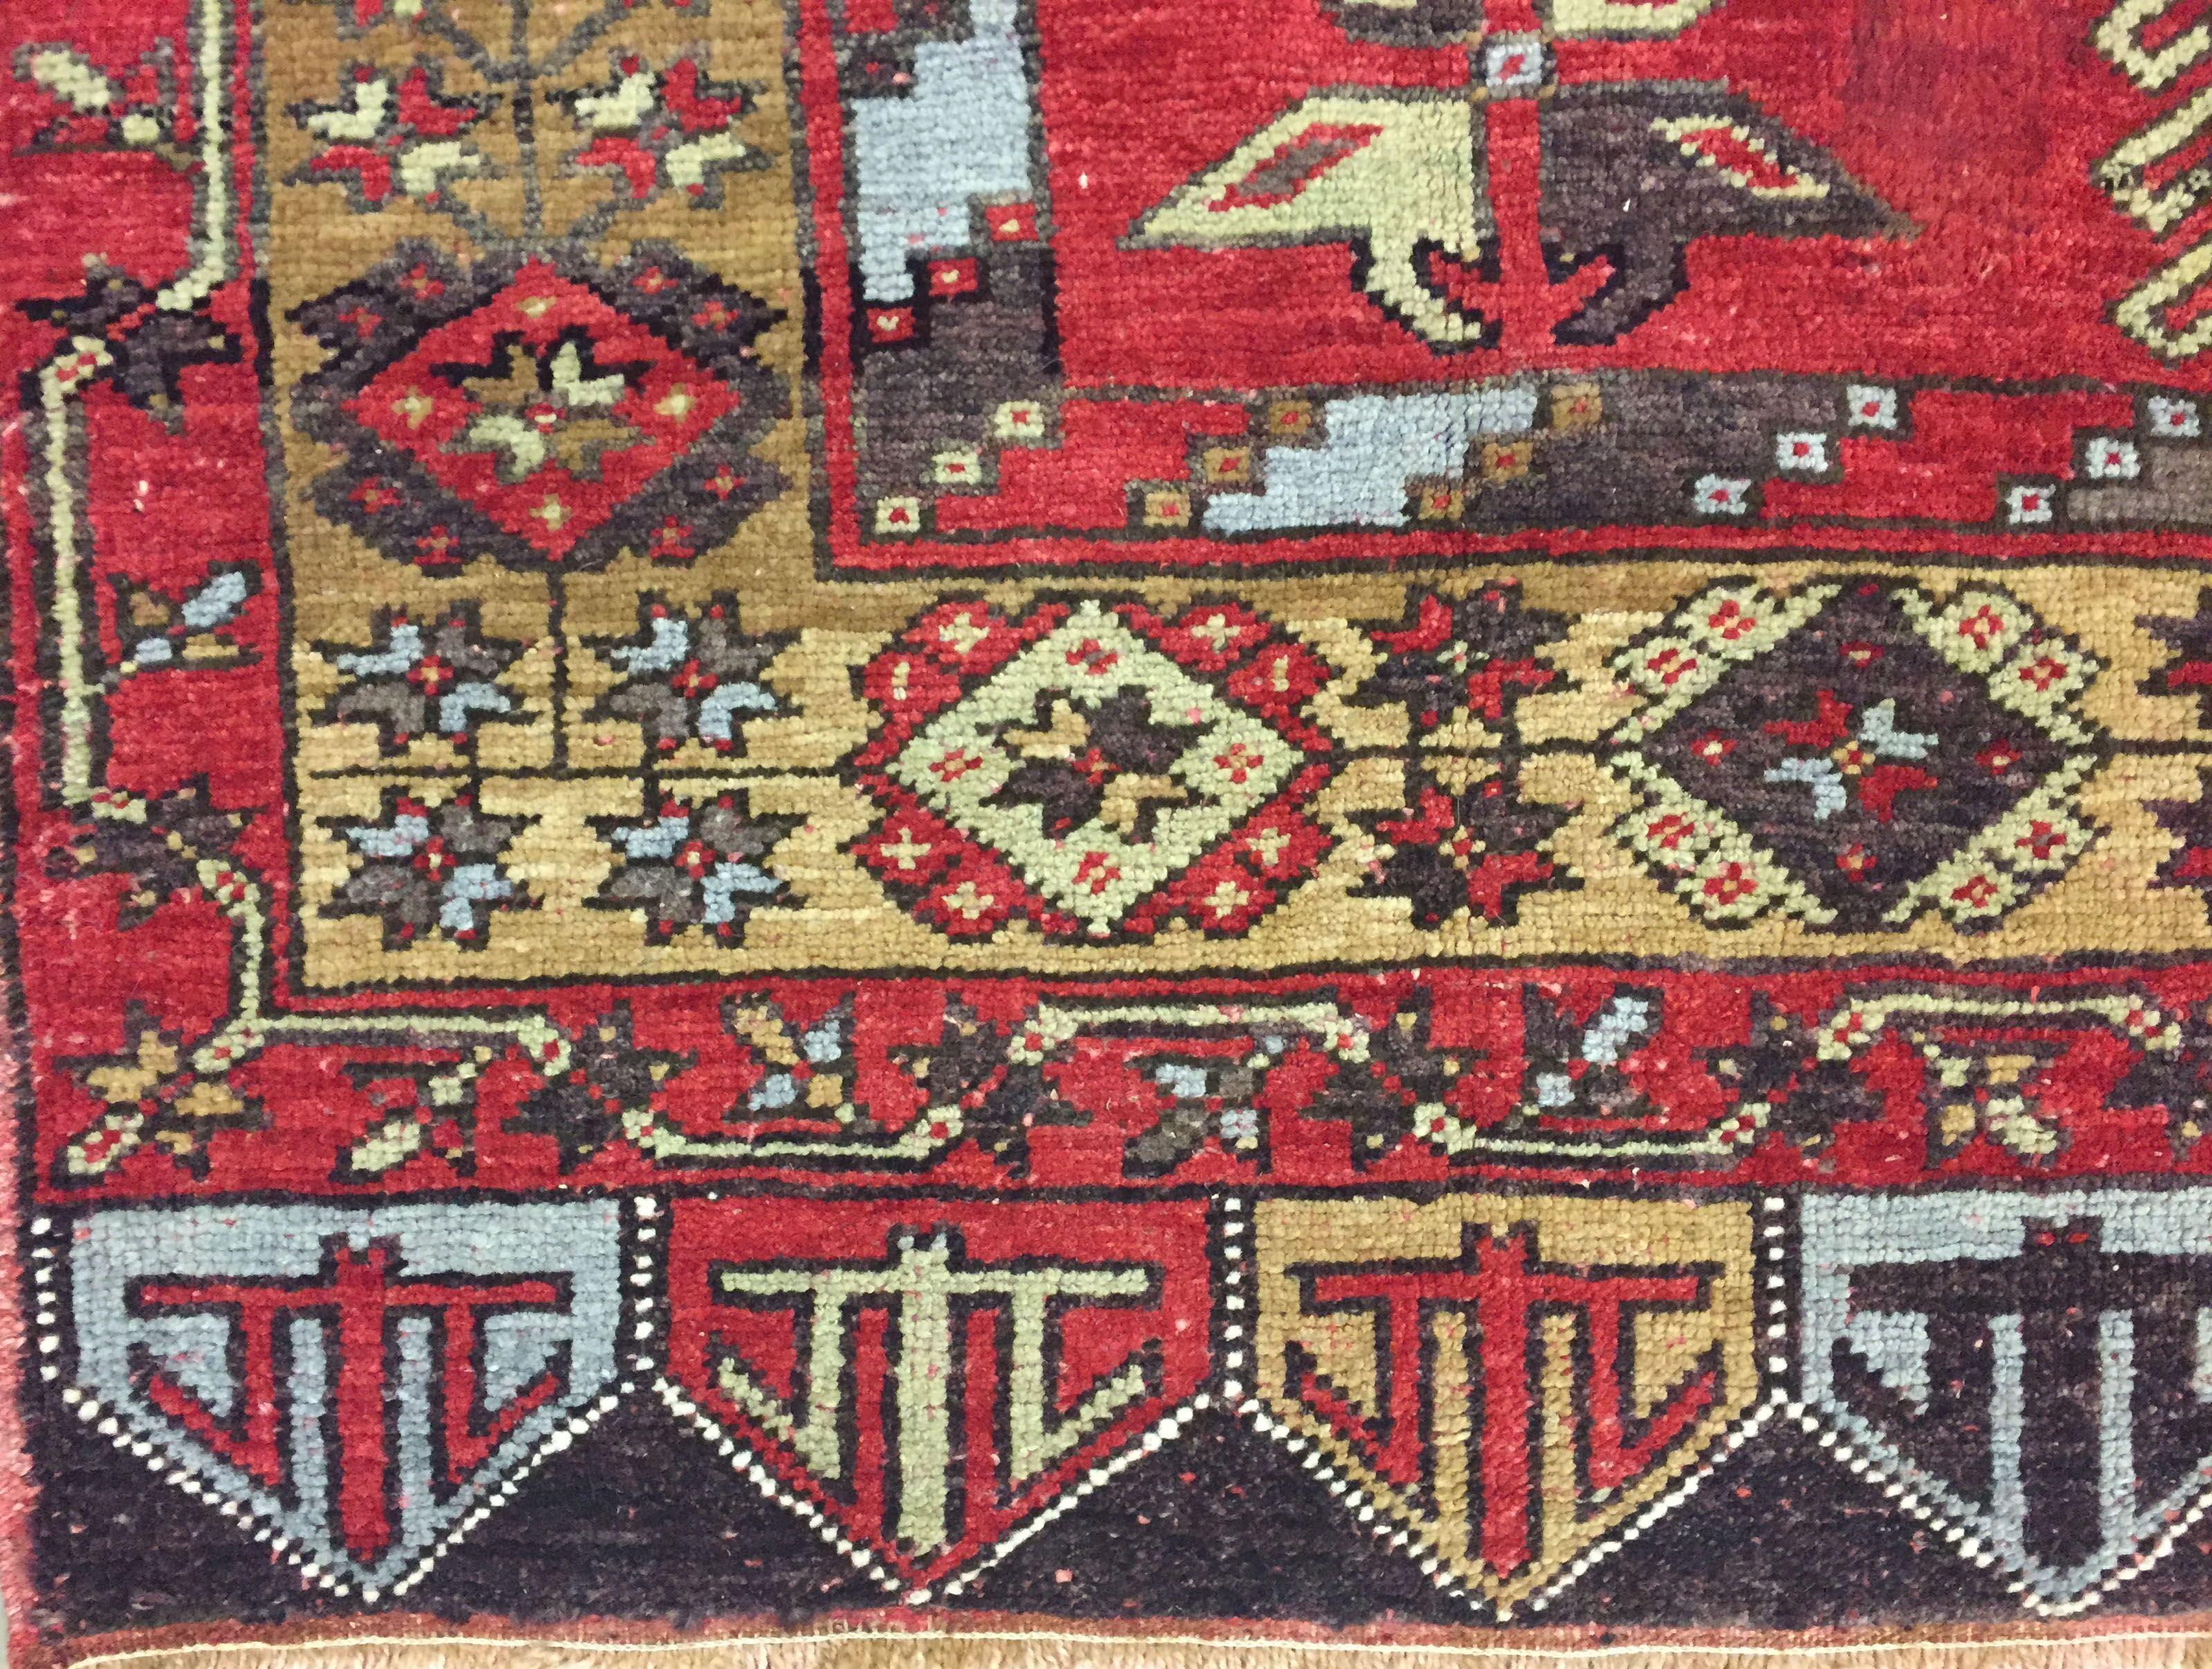 Vintage Turkish Oushak Runner 4'11 x 12'10 In Good Condition For Sale In New York, NY